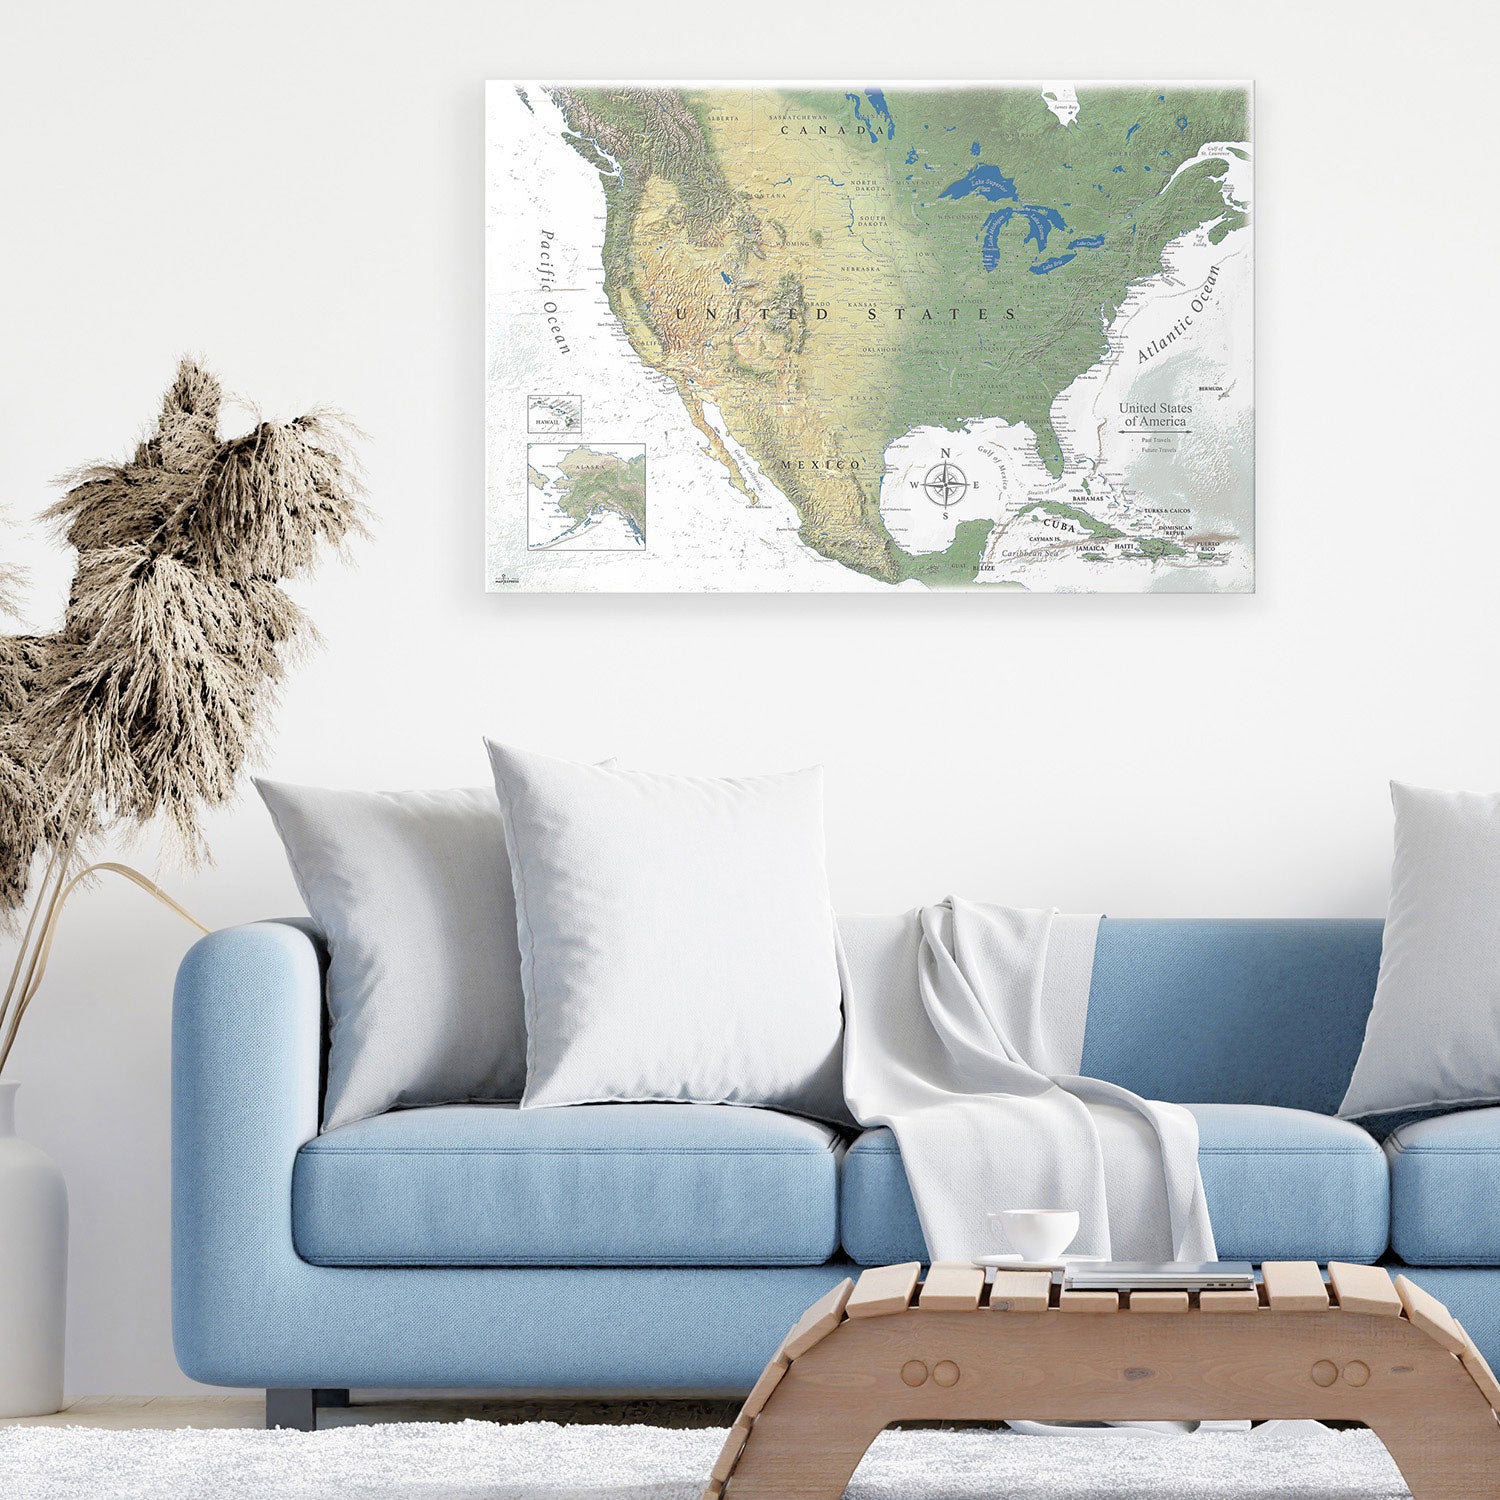 Canvas World Map with Push Pins, Lifetime Warranty